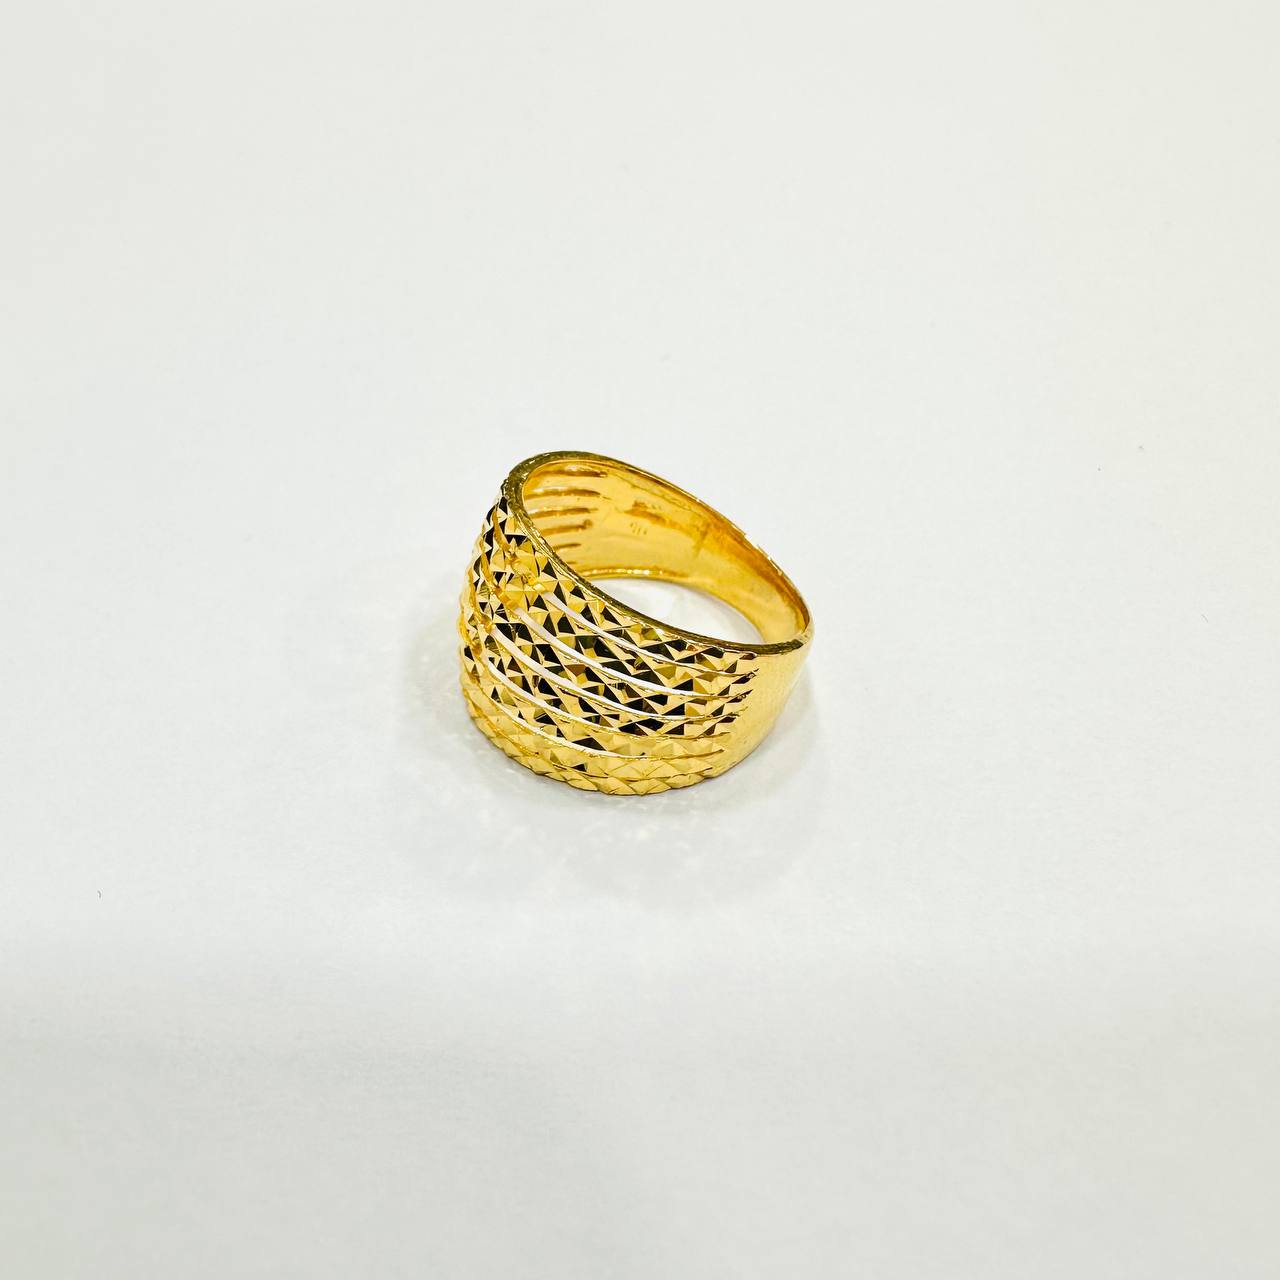 22k / 916 Gold Wide cutting ring (Very Wide)-916 gold-Best Gold Shop